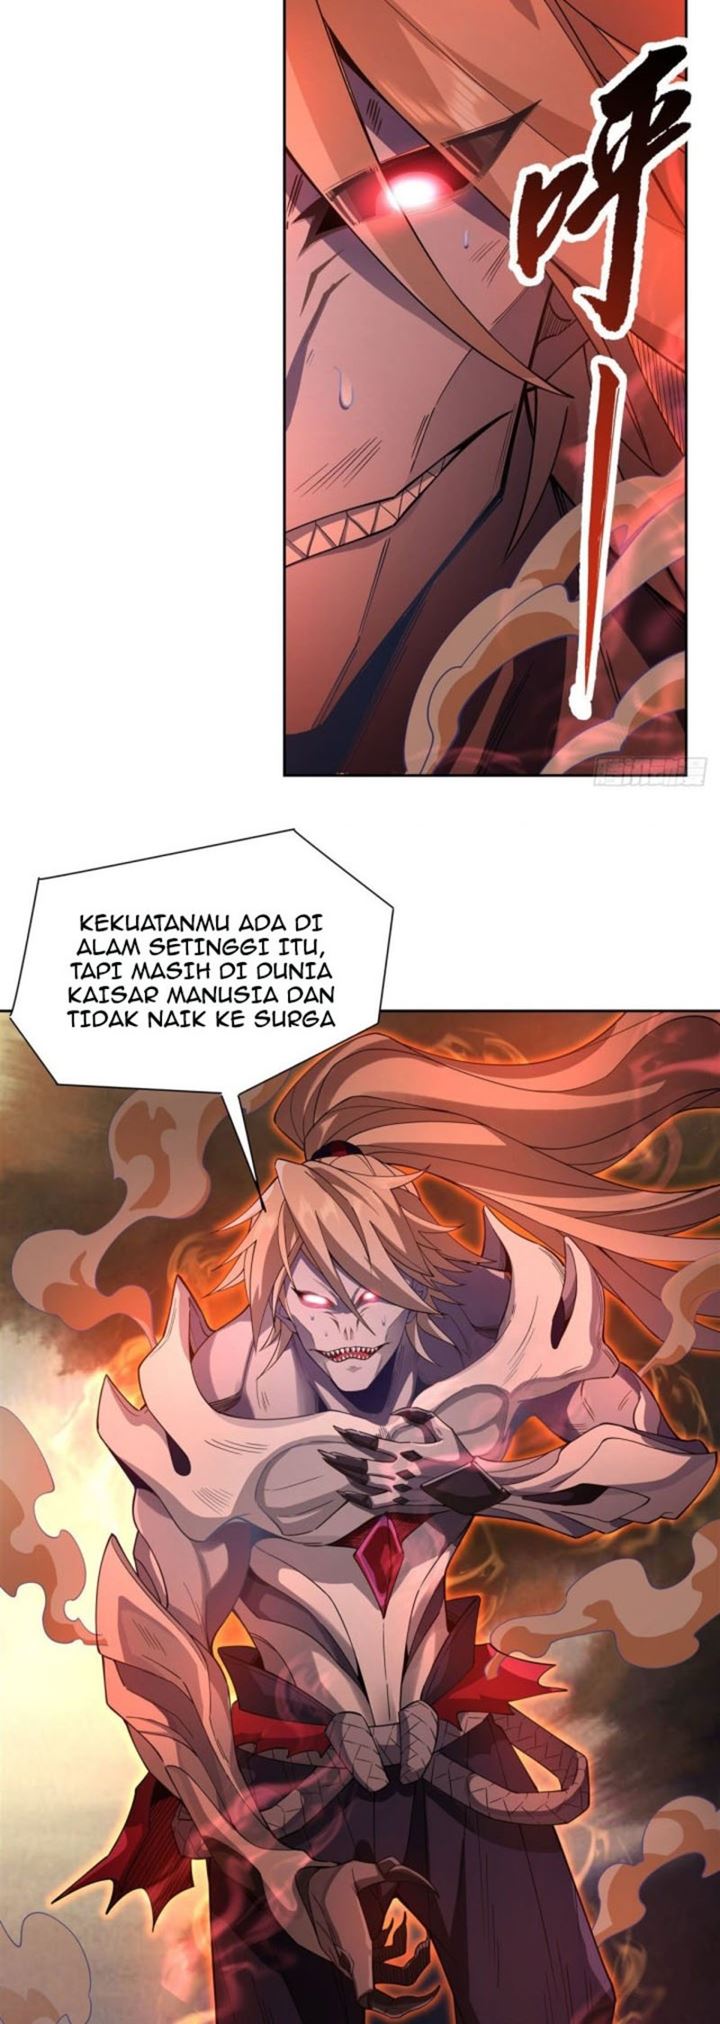 Dilarang COPAS - situs resmi www.mangacanblog.com - Komik my female apprentices are all big shots from the future 020 - chapter 20 21 Indonesia my female apprentices are all big shots from the future 020 - chapter 20 Terbaru 24|Baca Manga Komik Indonesia|Mangacan